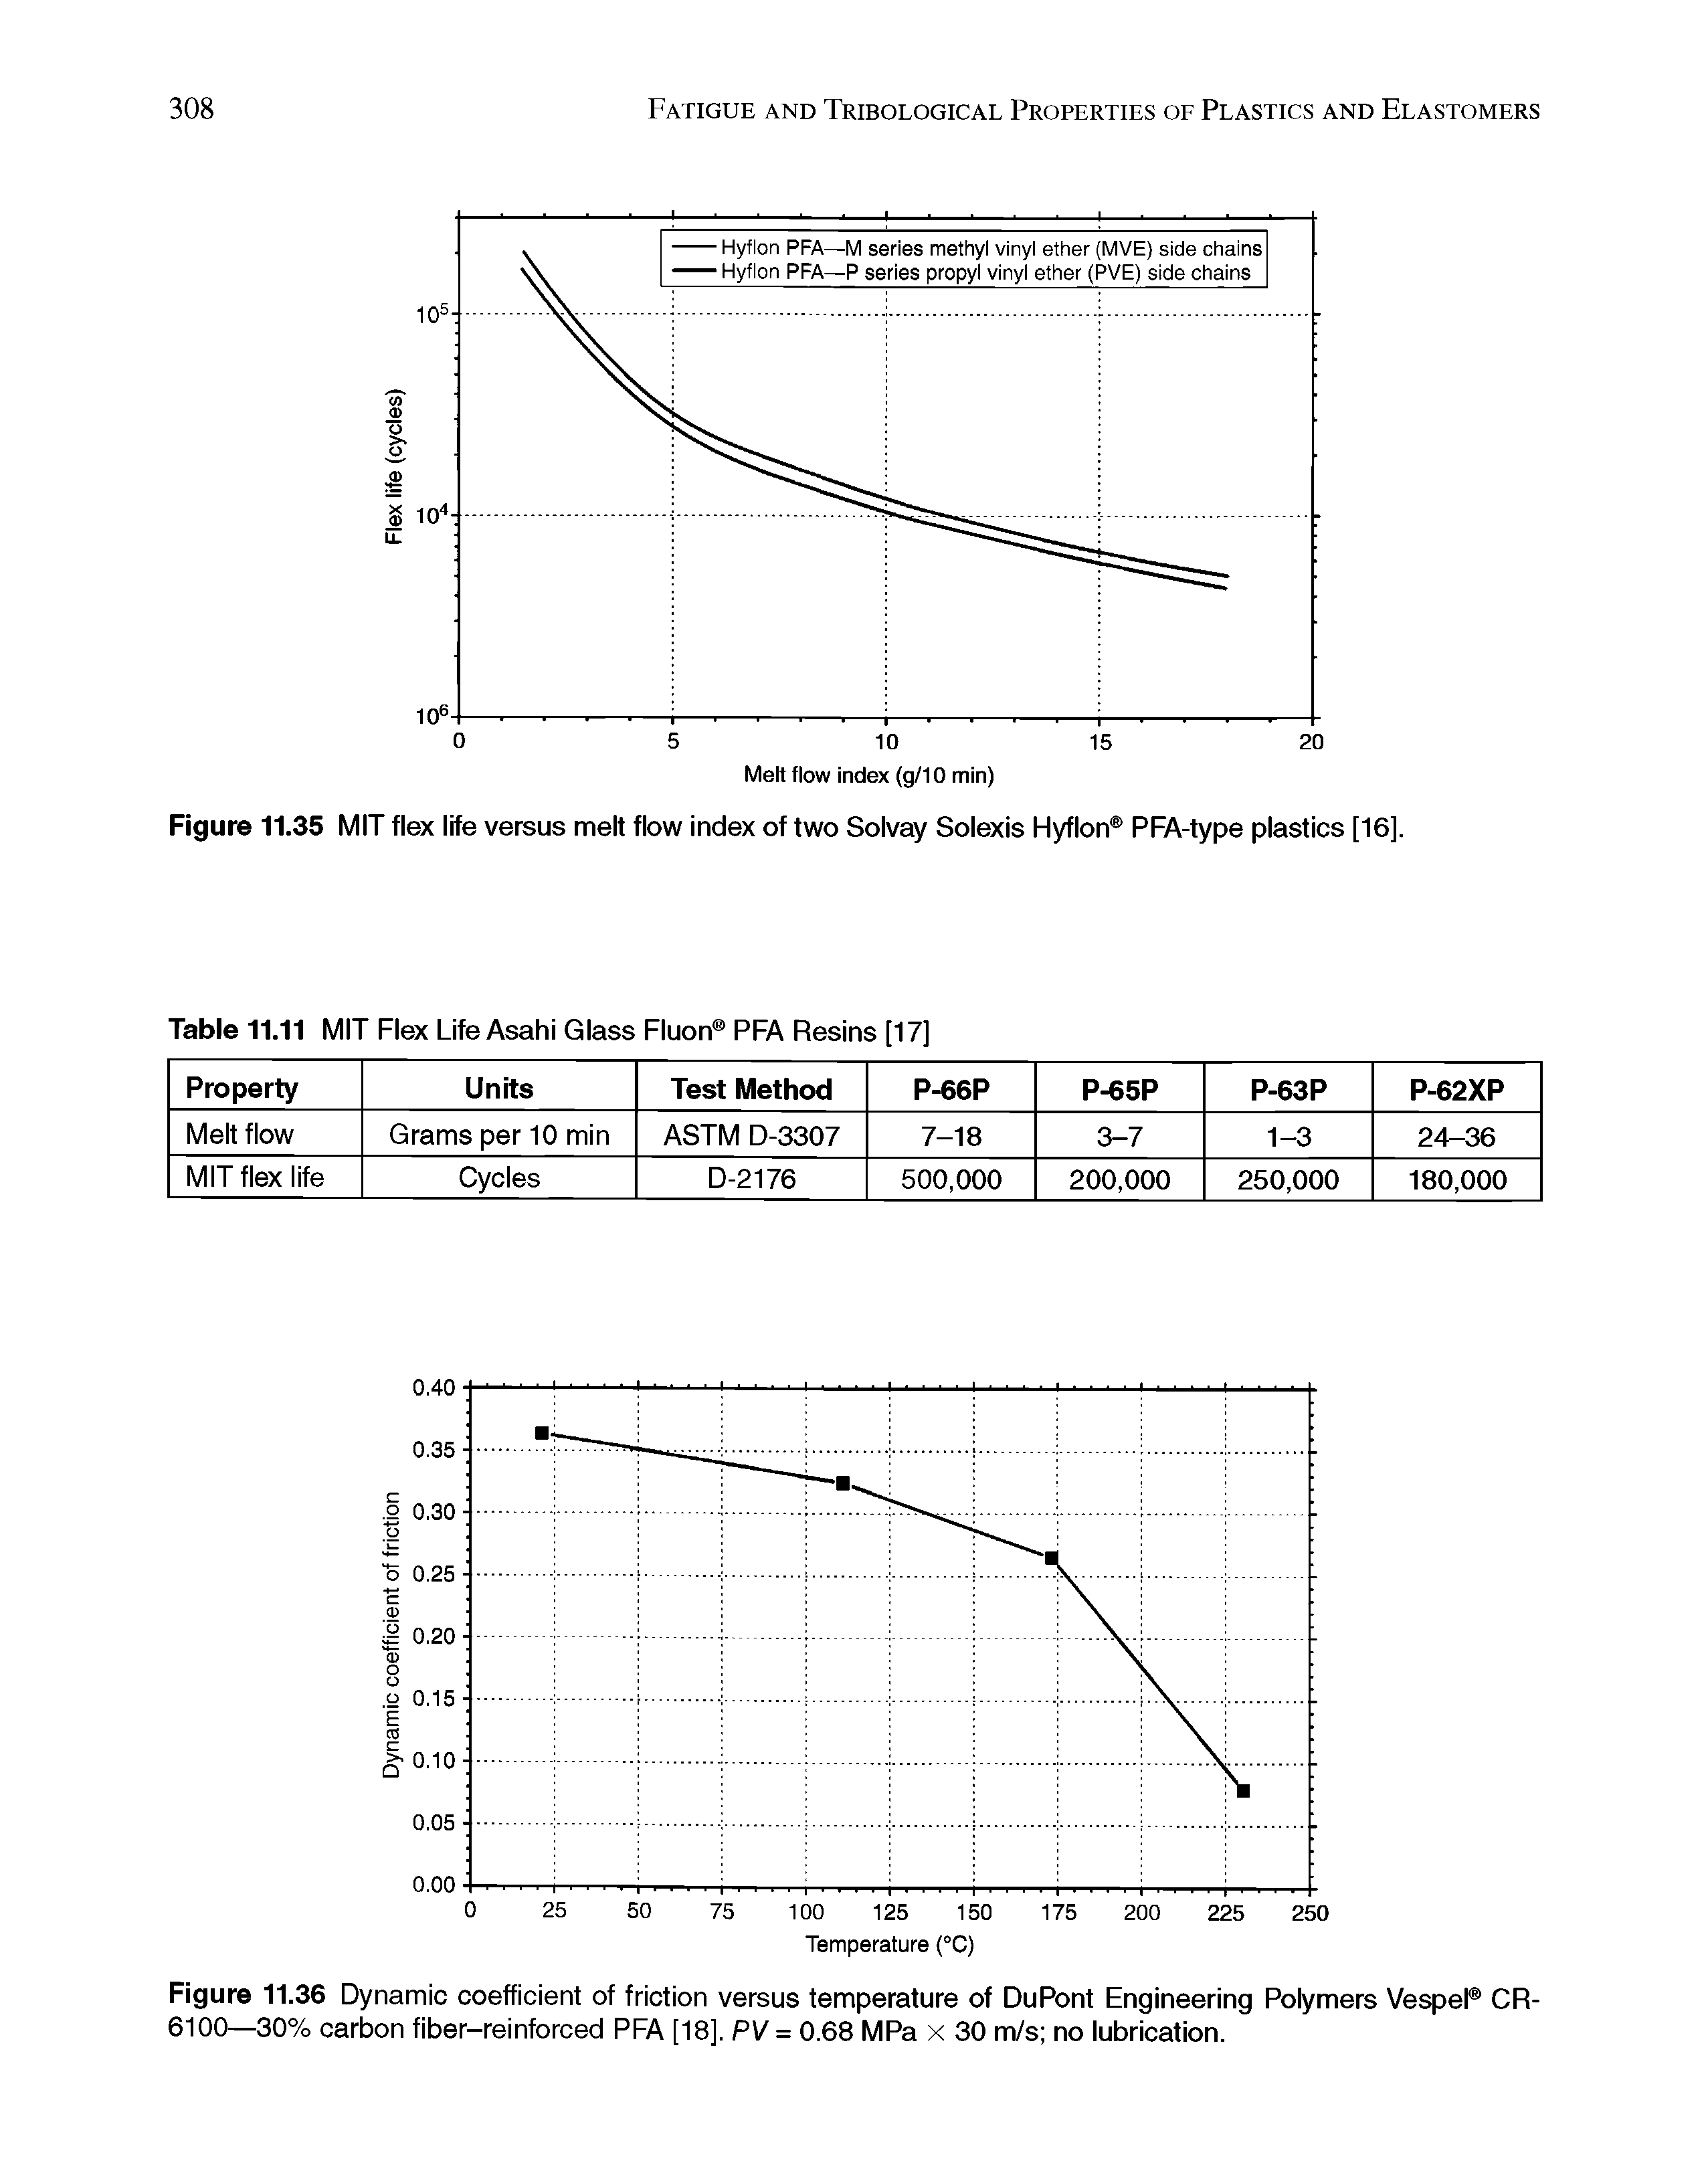 Figure 11.36 Dynamic coefficient of friction versus temperature of DuPont Engineering Polymers Vespel CR-6100—30% carbon fiber-reinforced PFA [18], PV = 0.68 MPa x 30 m/s no lubrication.